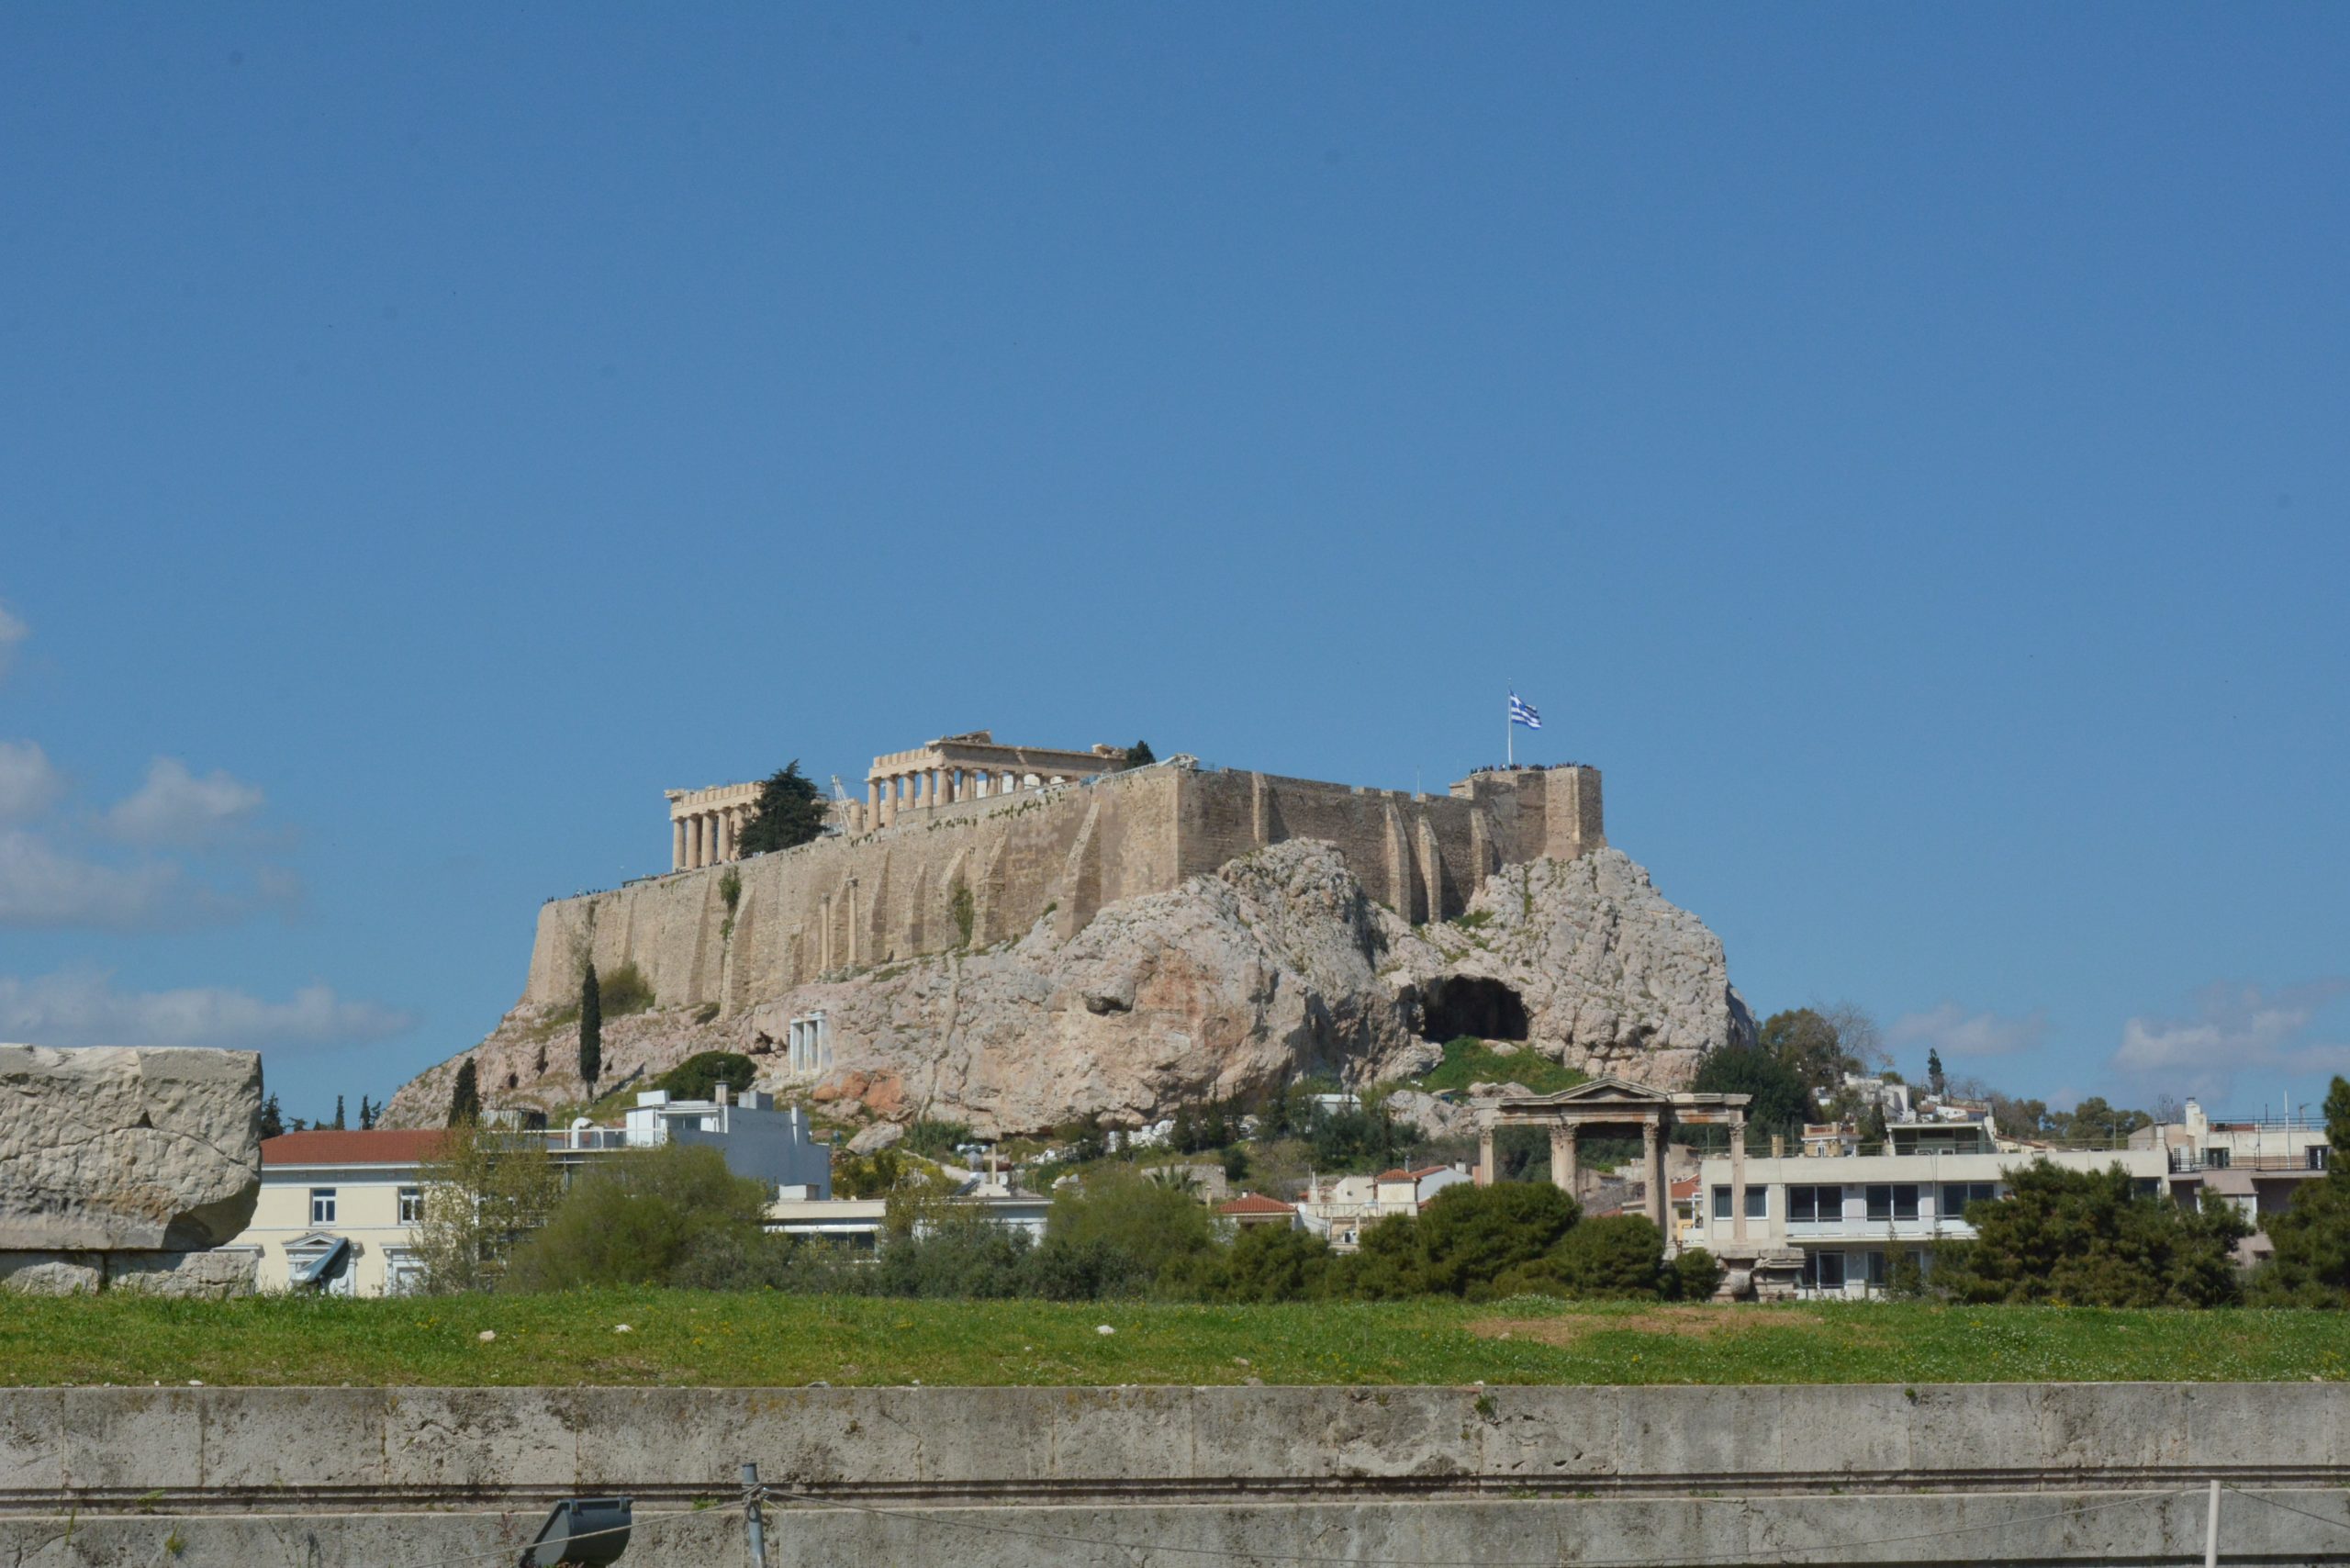 The Acropolis In Athens - Sheet1